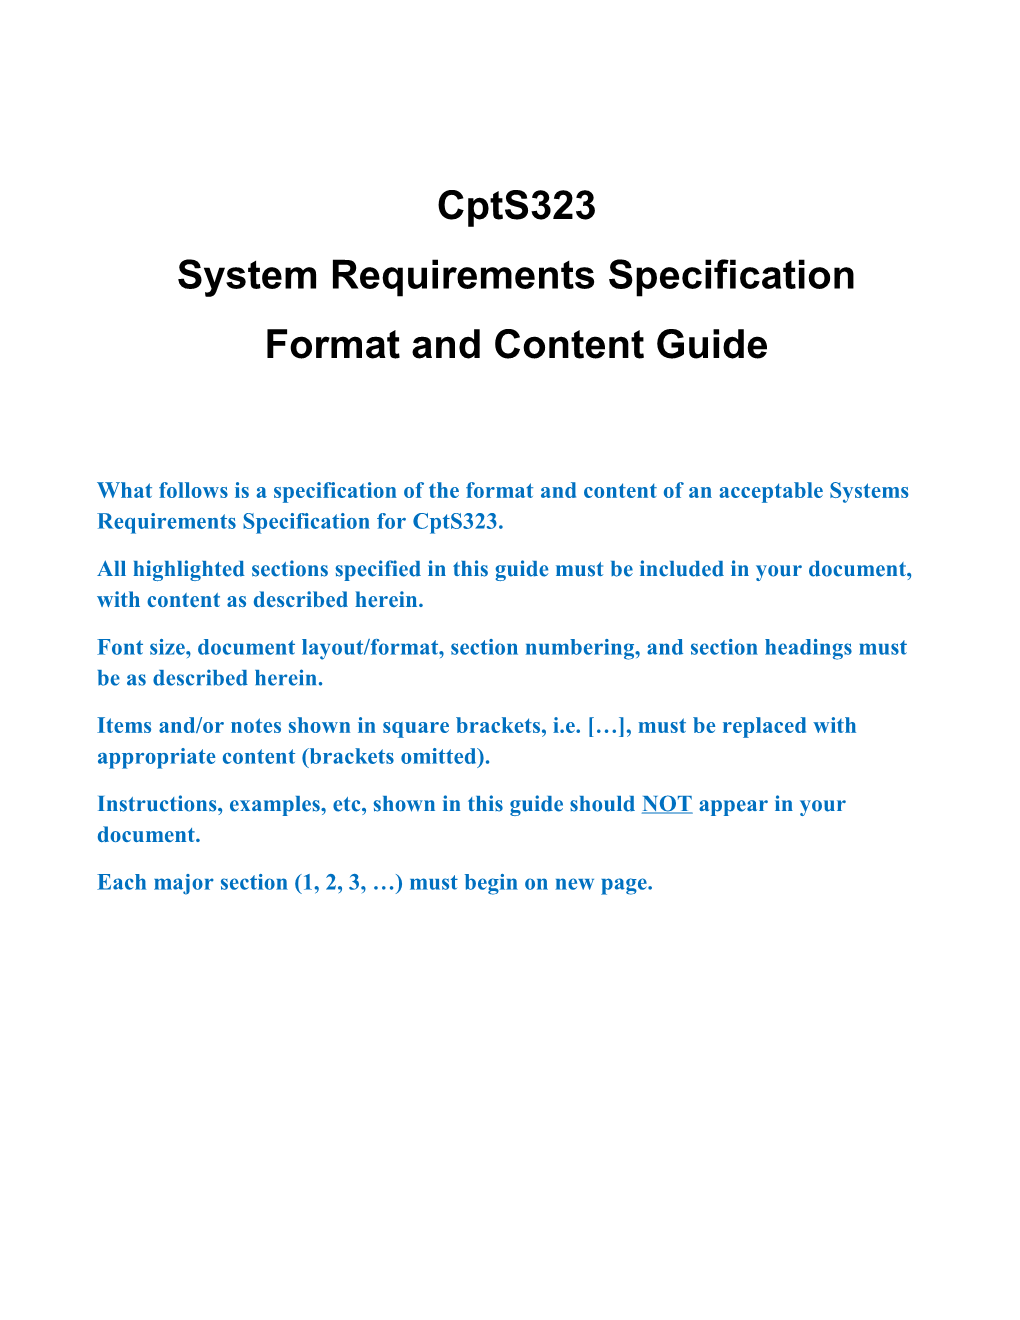 System Requirements Specification Insert Product Name Here in Header